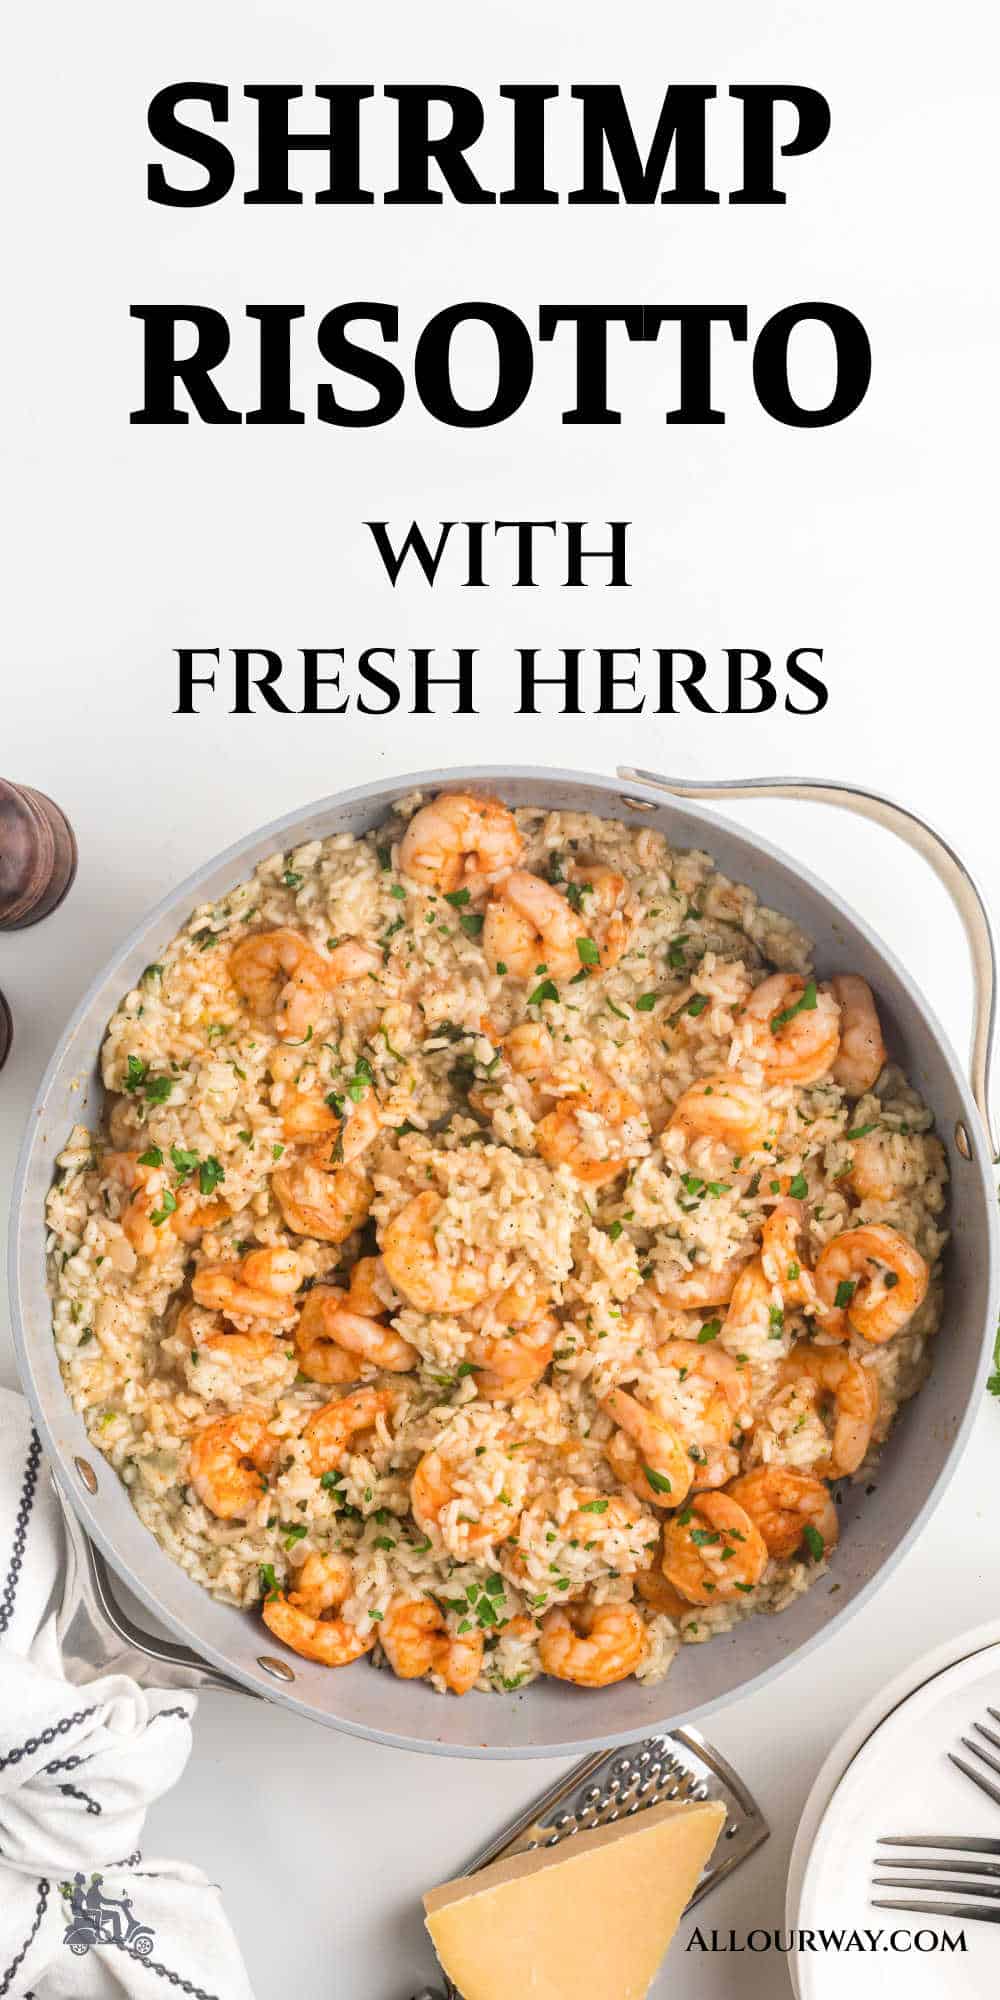 Pinterest image with title overlay for Shrimp risotto with fresh herbs.